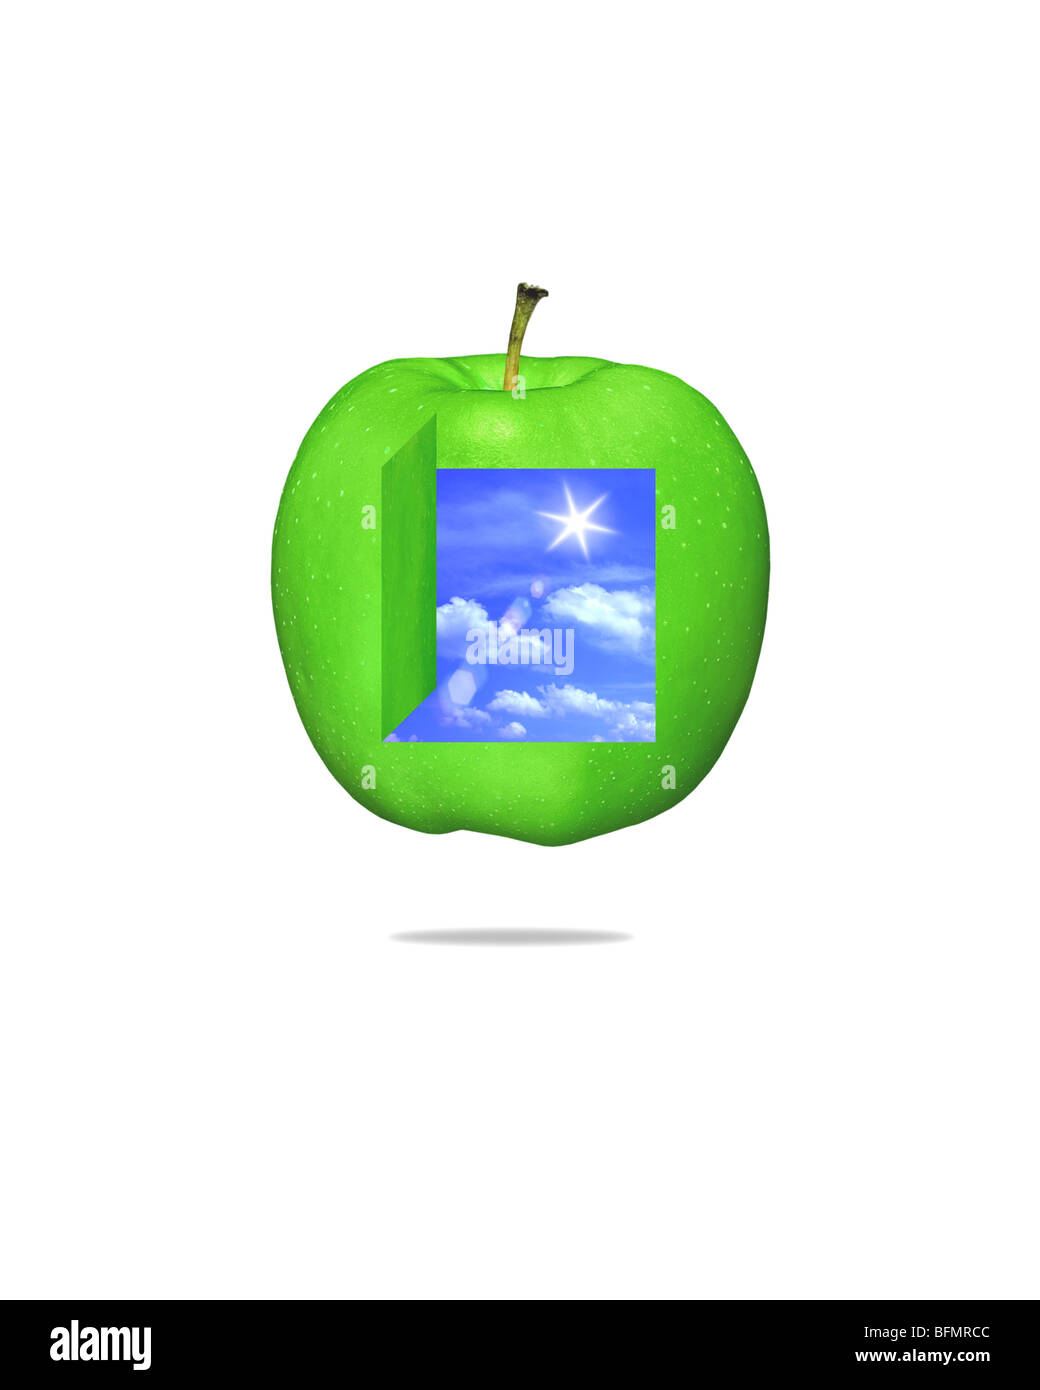 Sky In A Green Apple Stock Photo Alamy